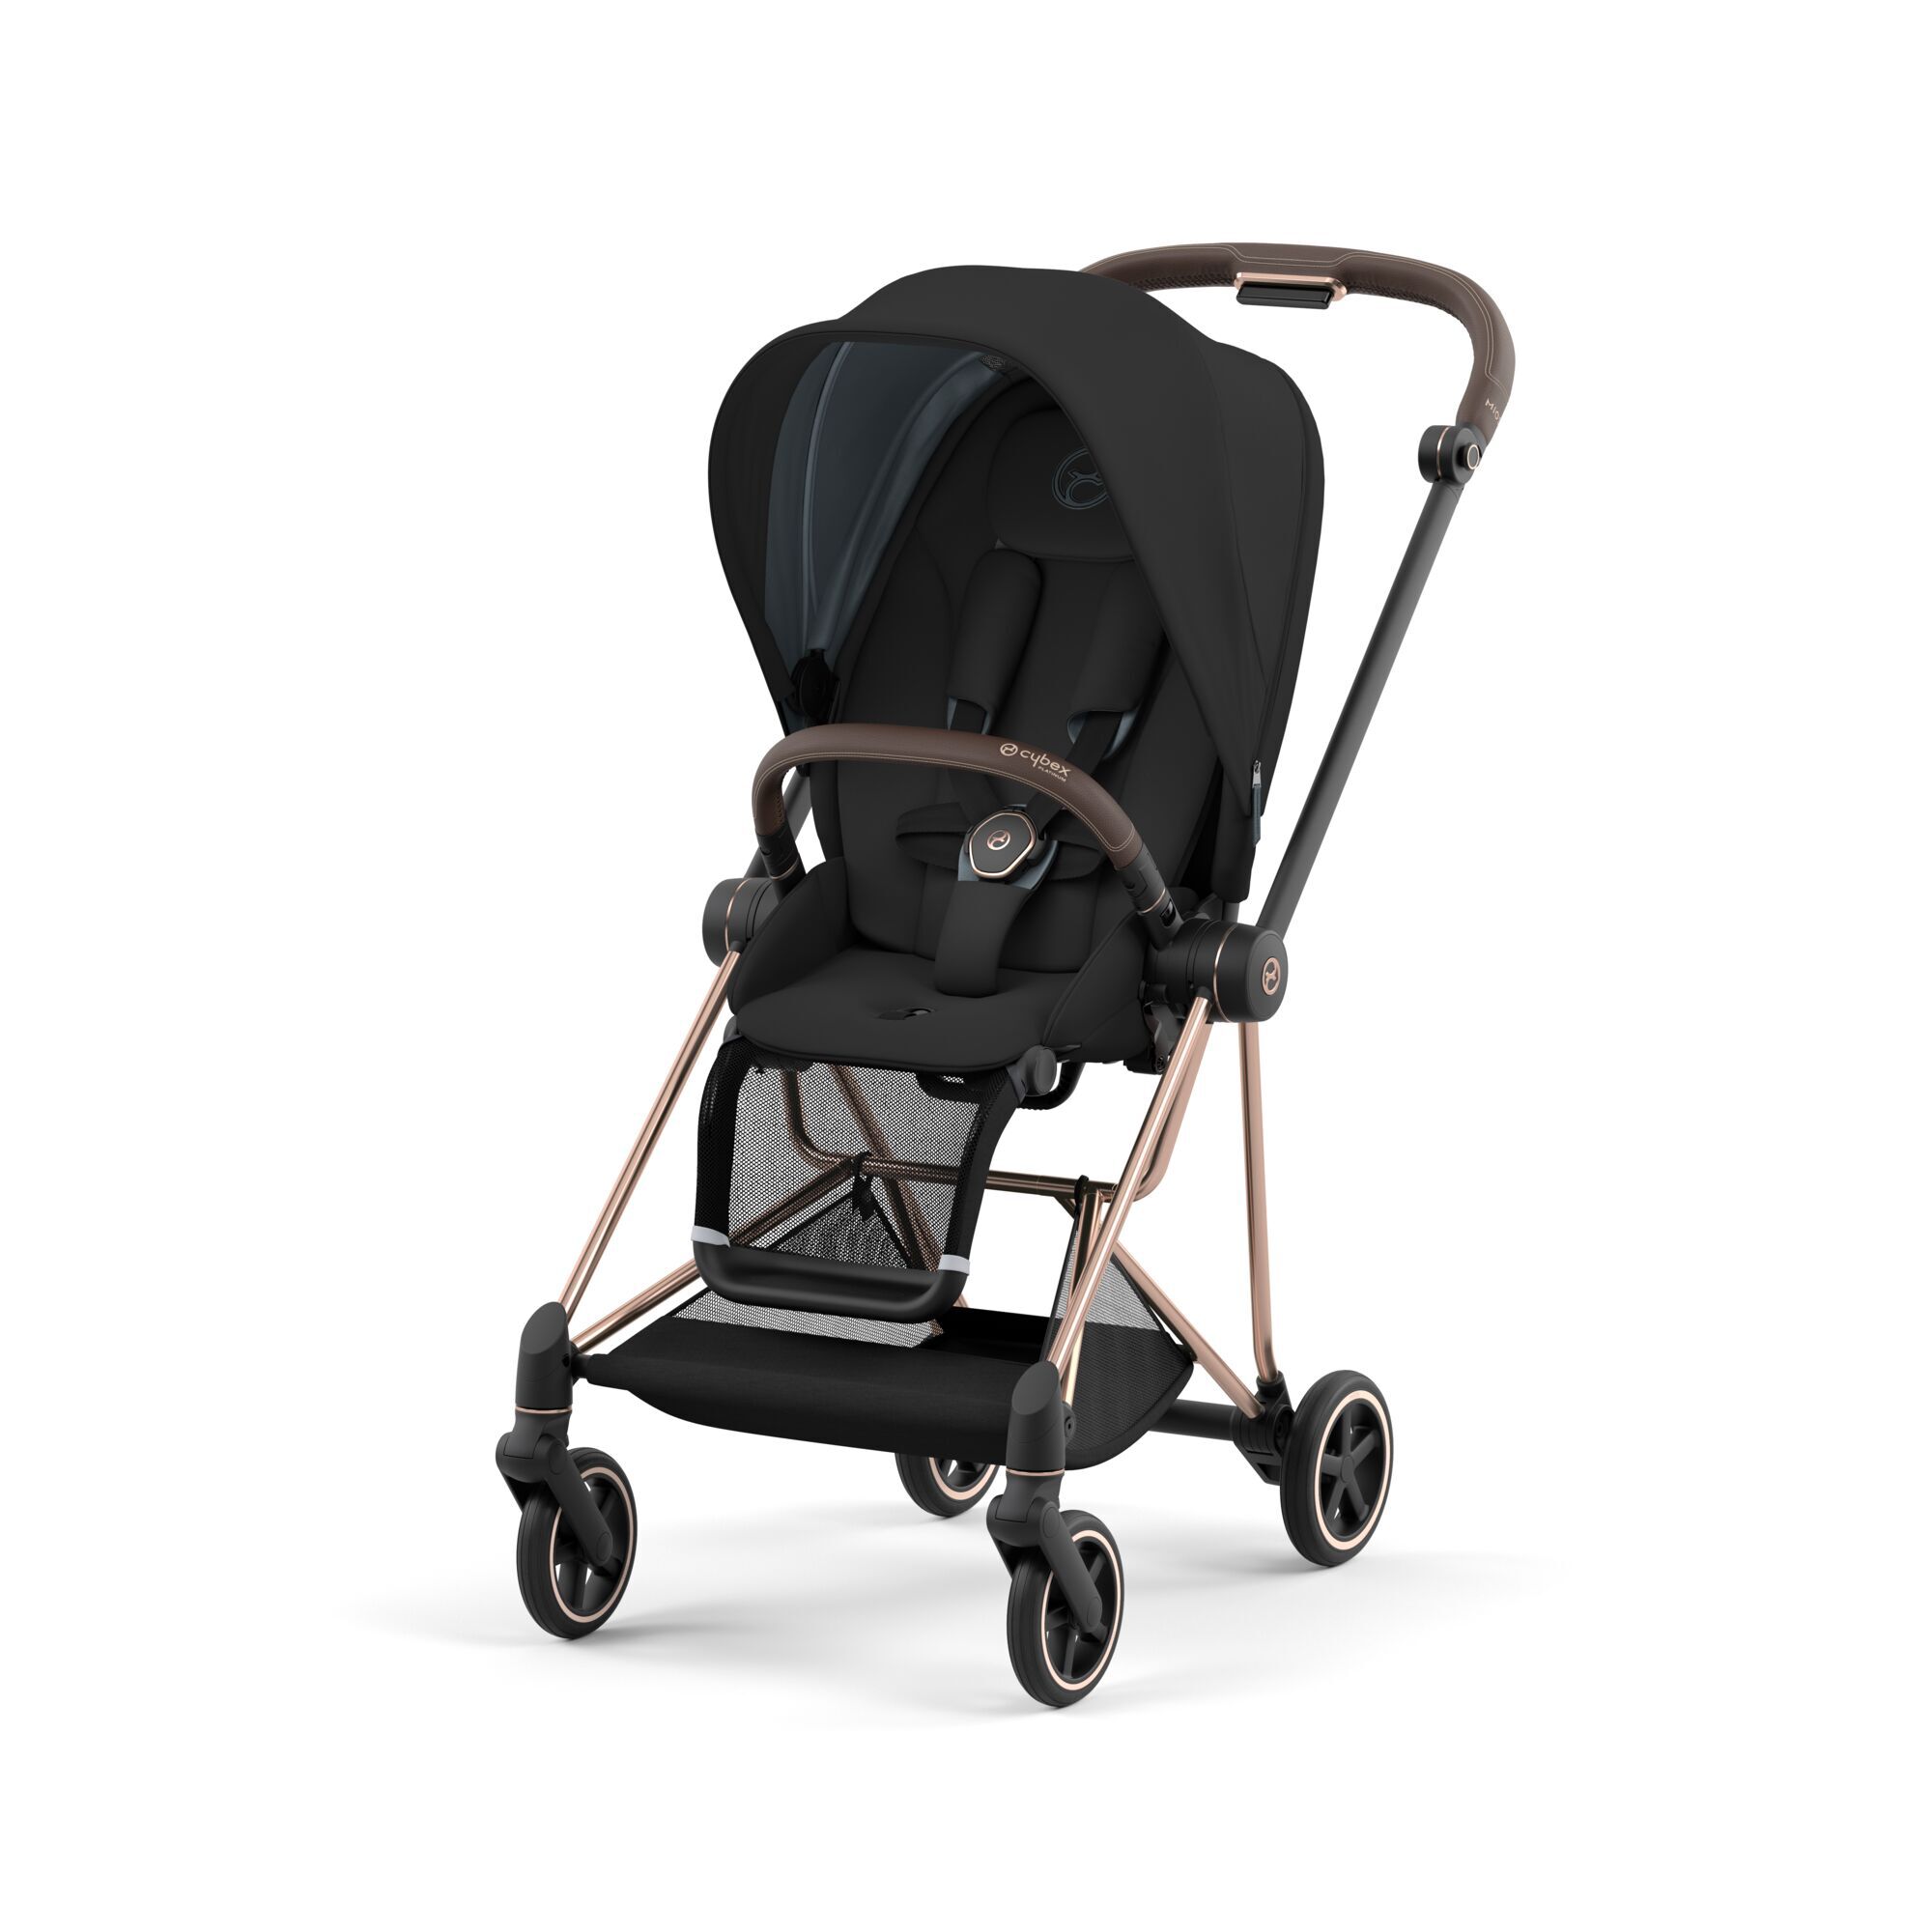 Reversible Seat Adjustable Leg Rest Smooth Ride All-Wheel Suspension One-Hand Compact Fold Manhattan Grey Seat with Chrome/Black Frame Extra Storage Cybex Mios 2 Complete Stroller 